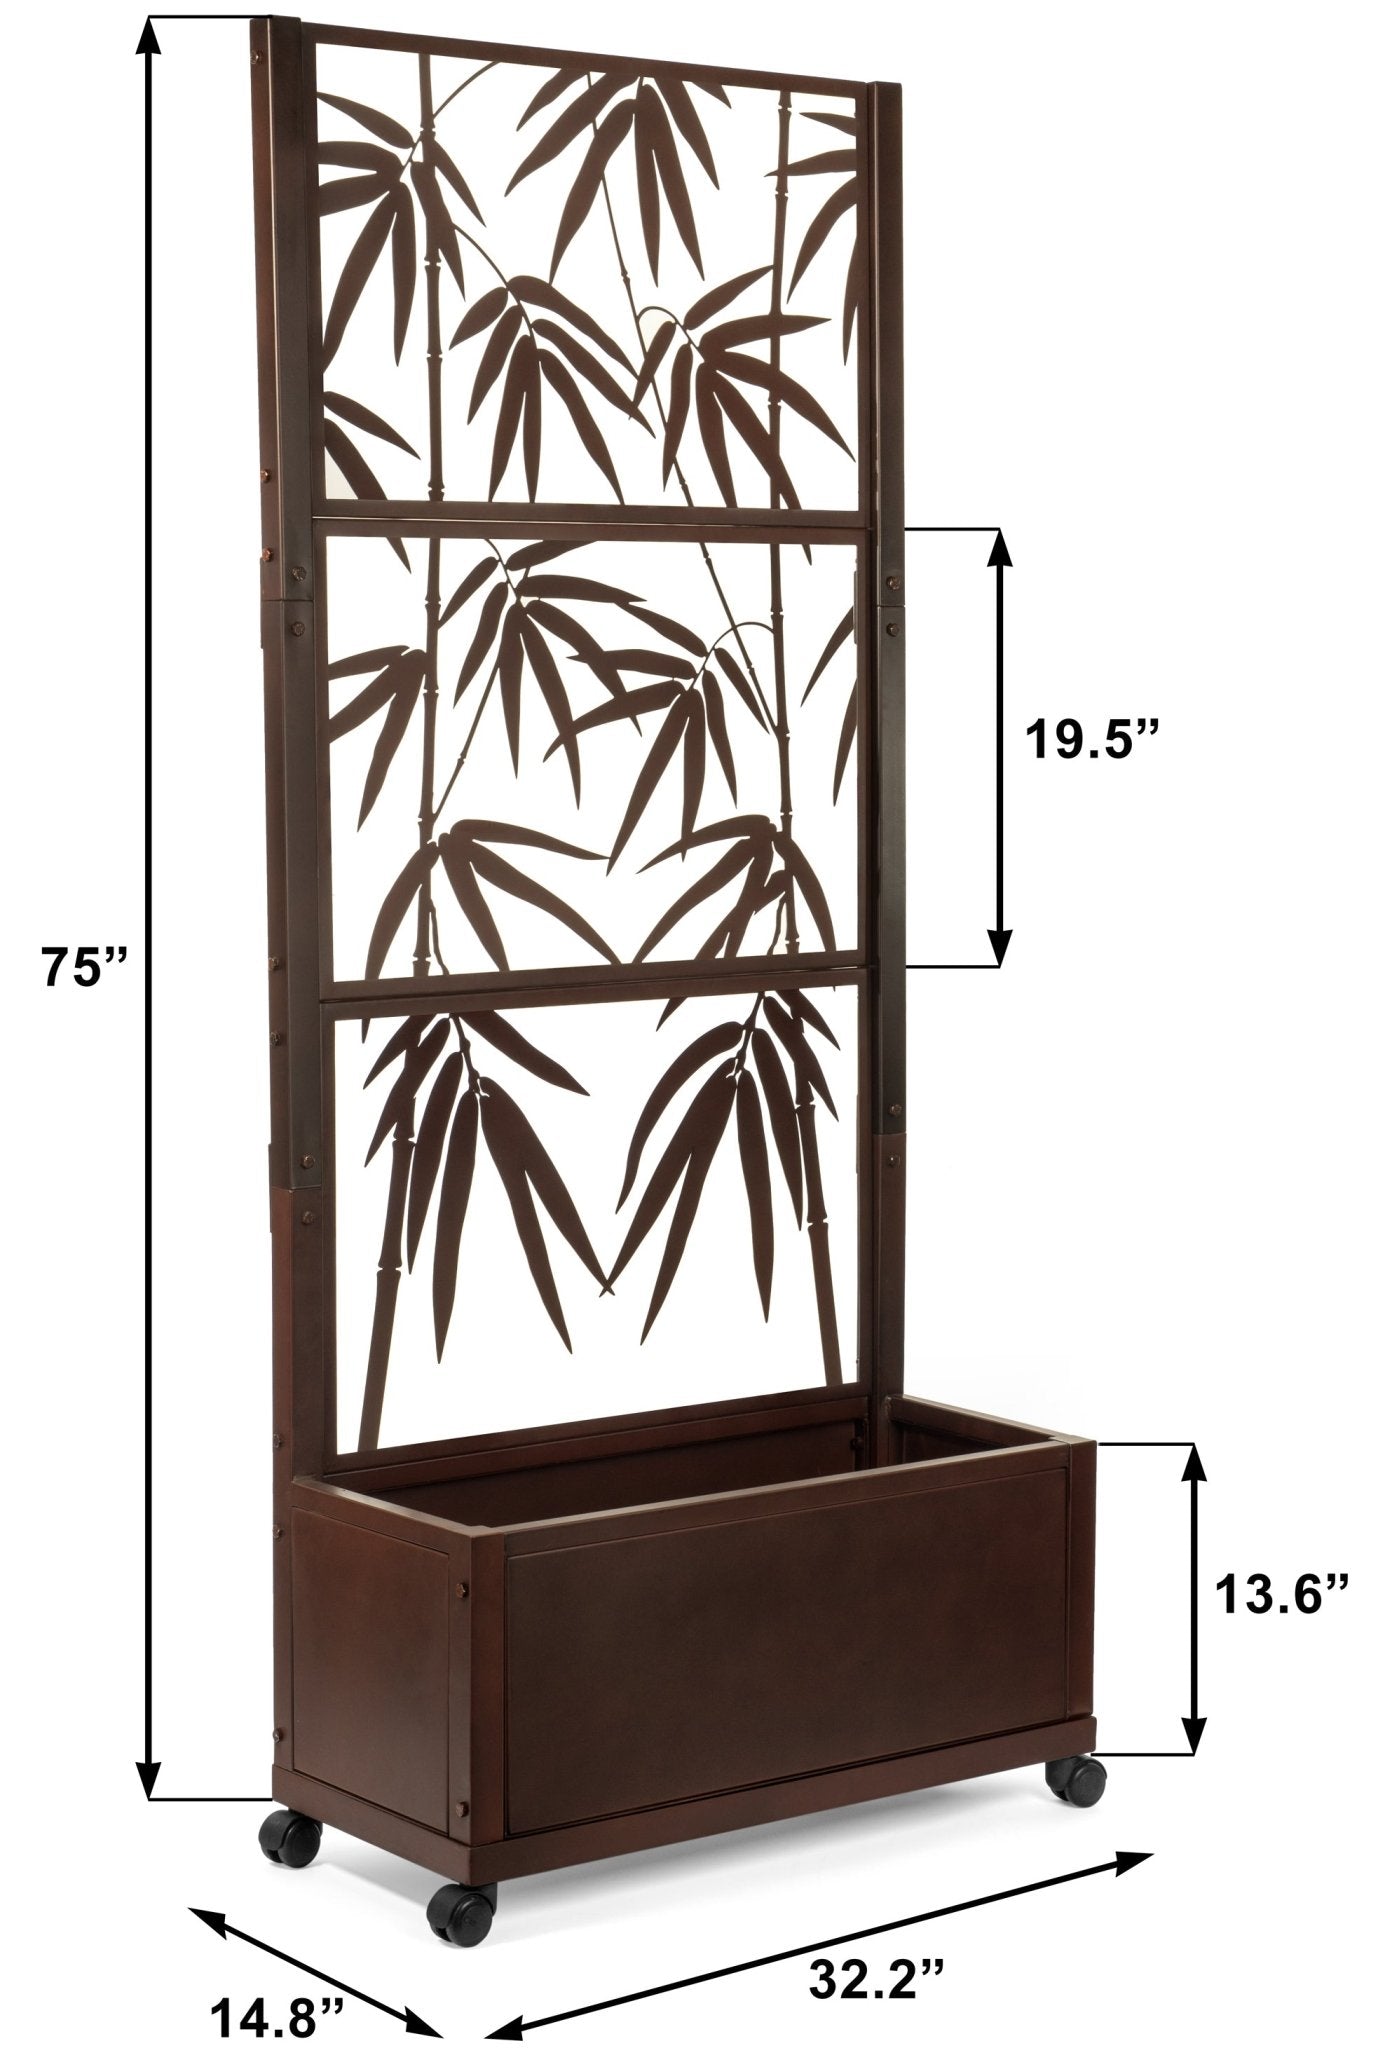 H Potter Trellis Planter Outdoor Indoor Privacy Screen Patio Deck Balcony Landscaping Yard Wedding Bamboo Pattern Mom Gift